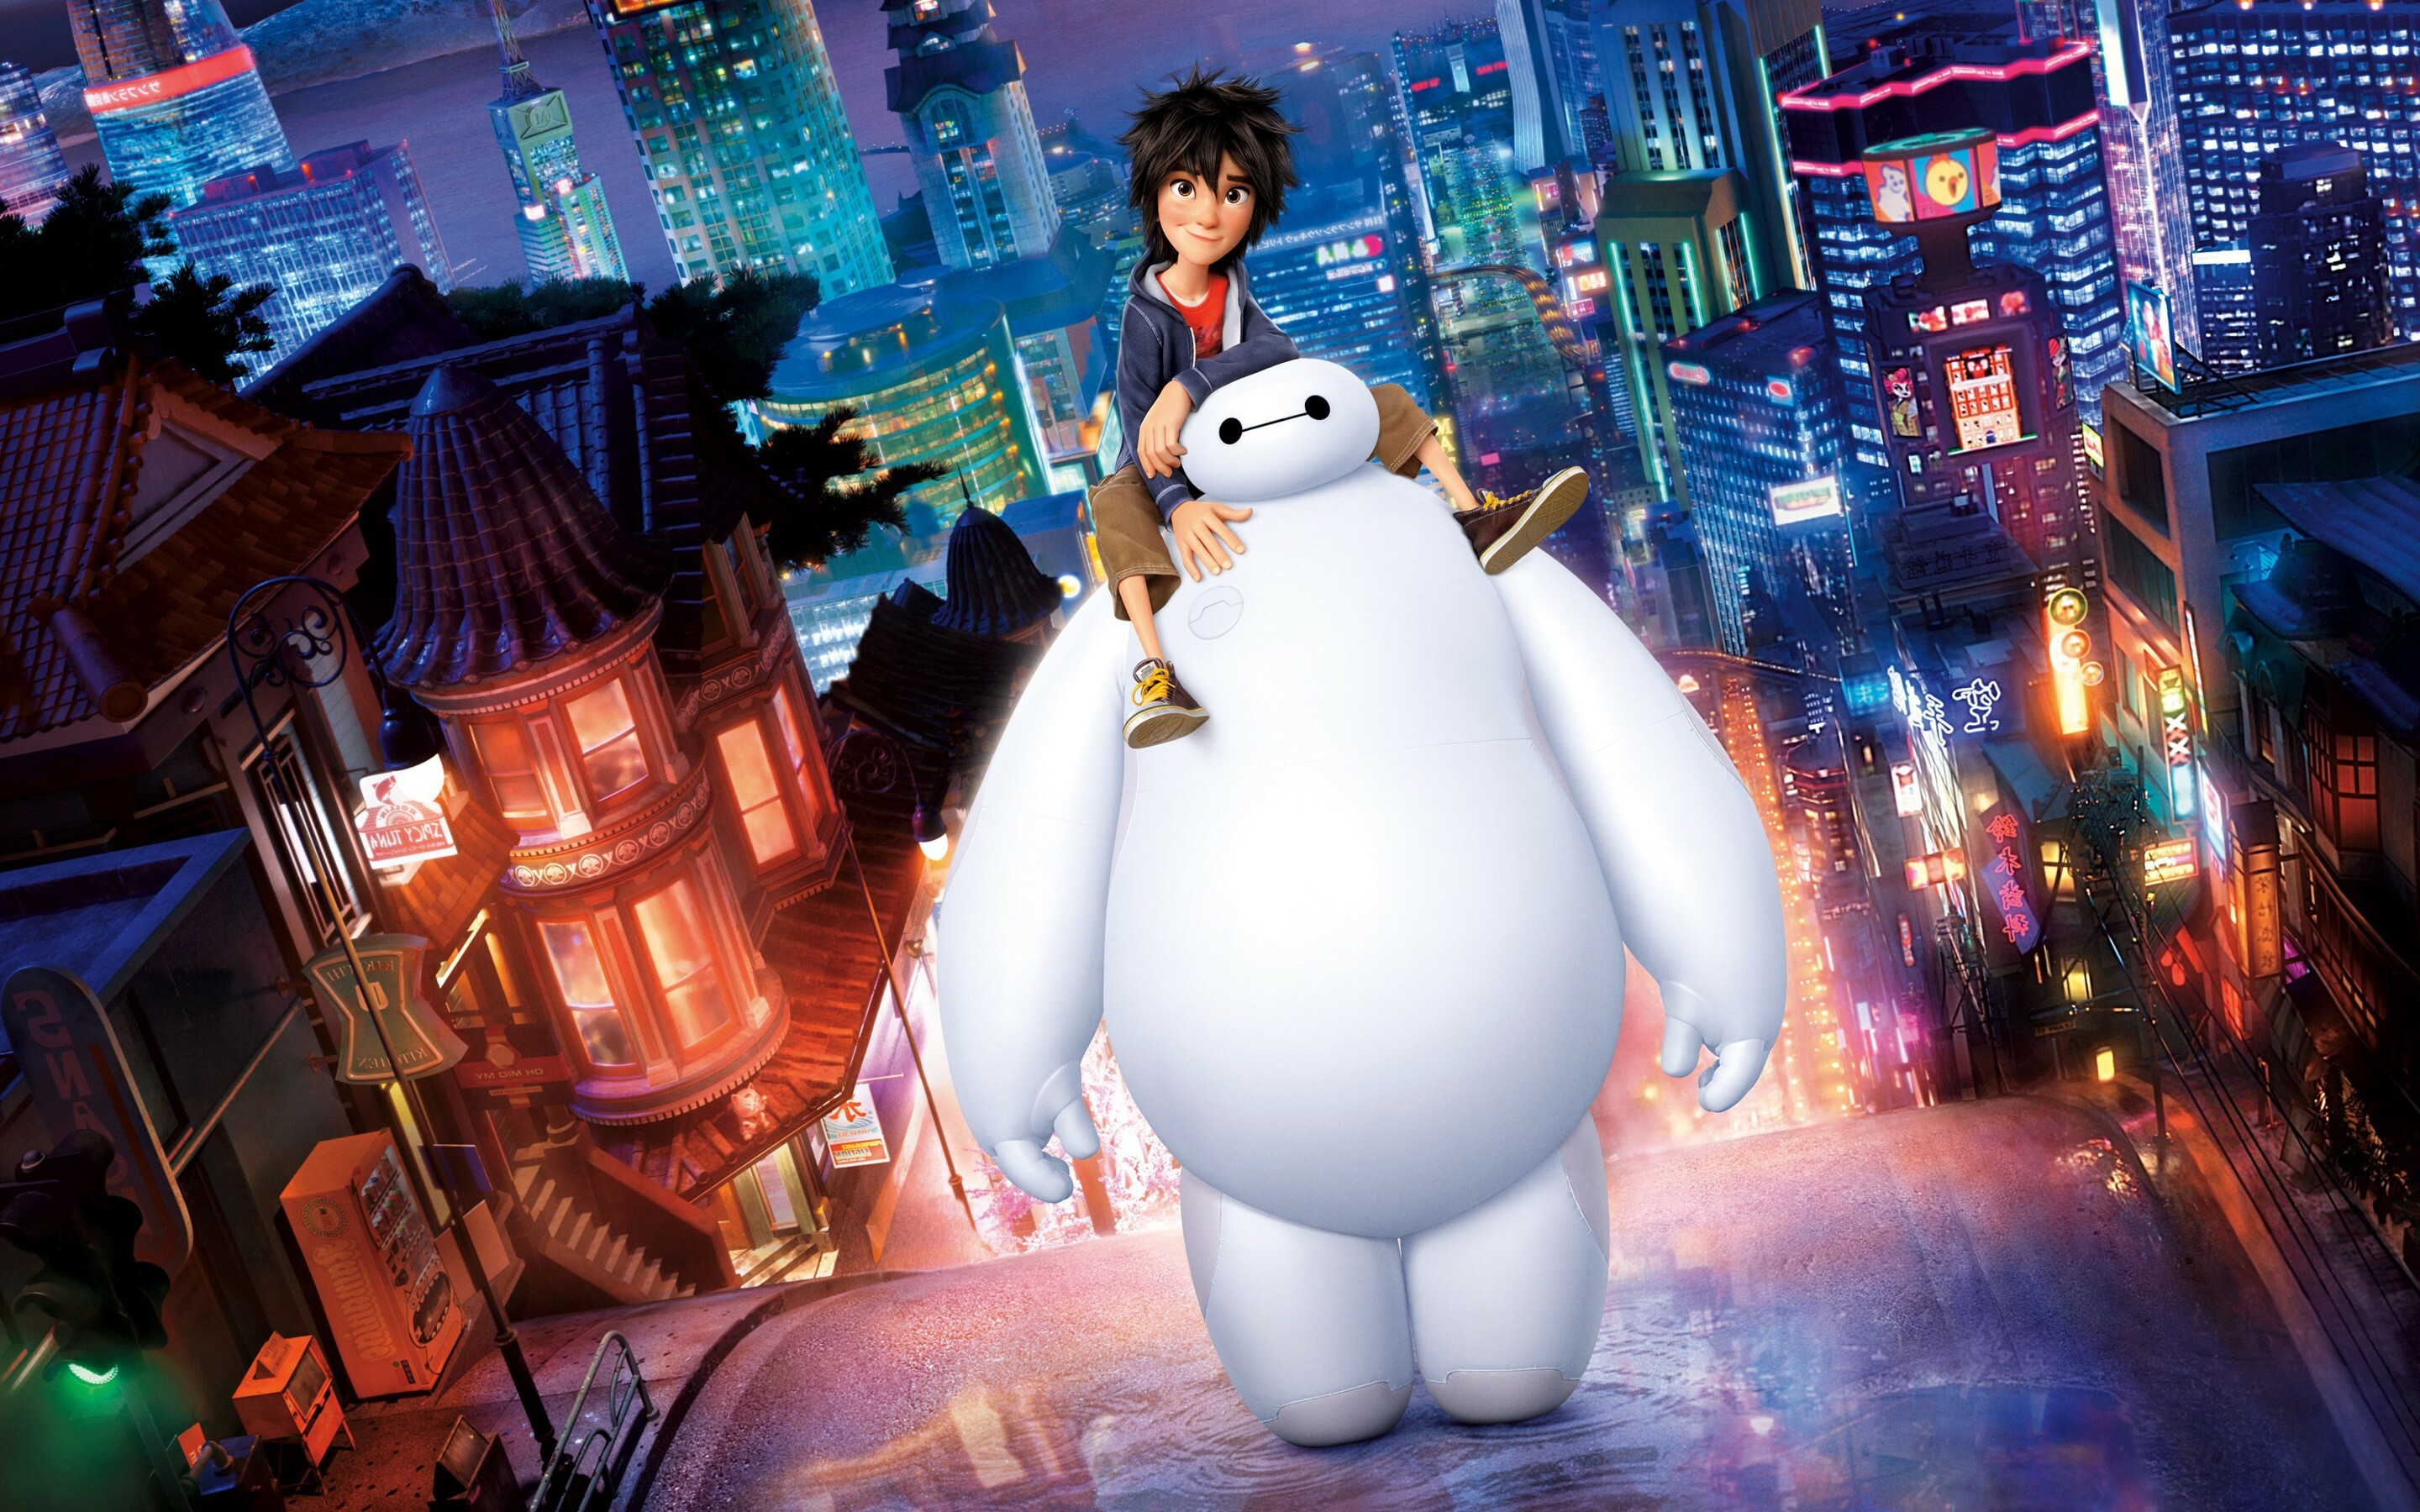 Big Hero 6: The first Disney animated film to feature Marvel Comics characters, Baymax. 2880x1800 HD Wallpaper.